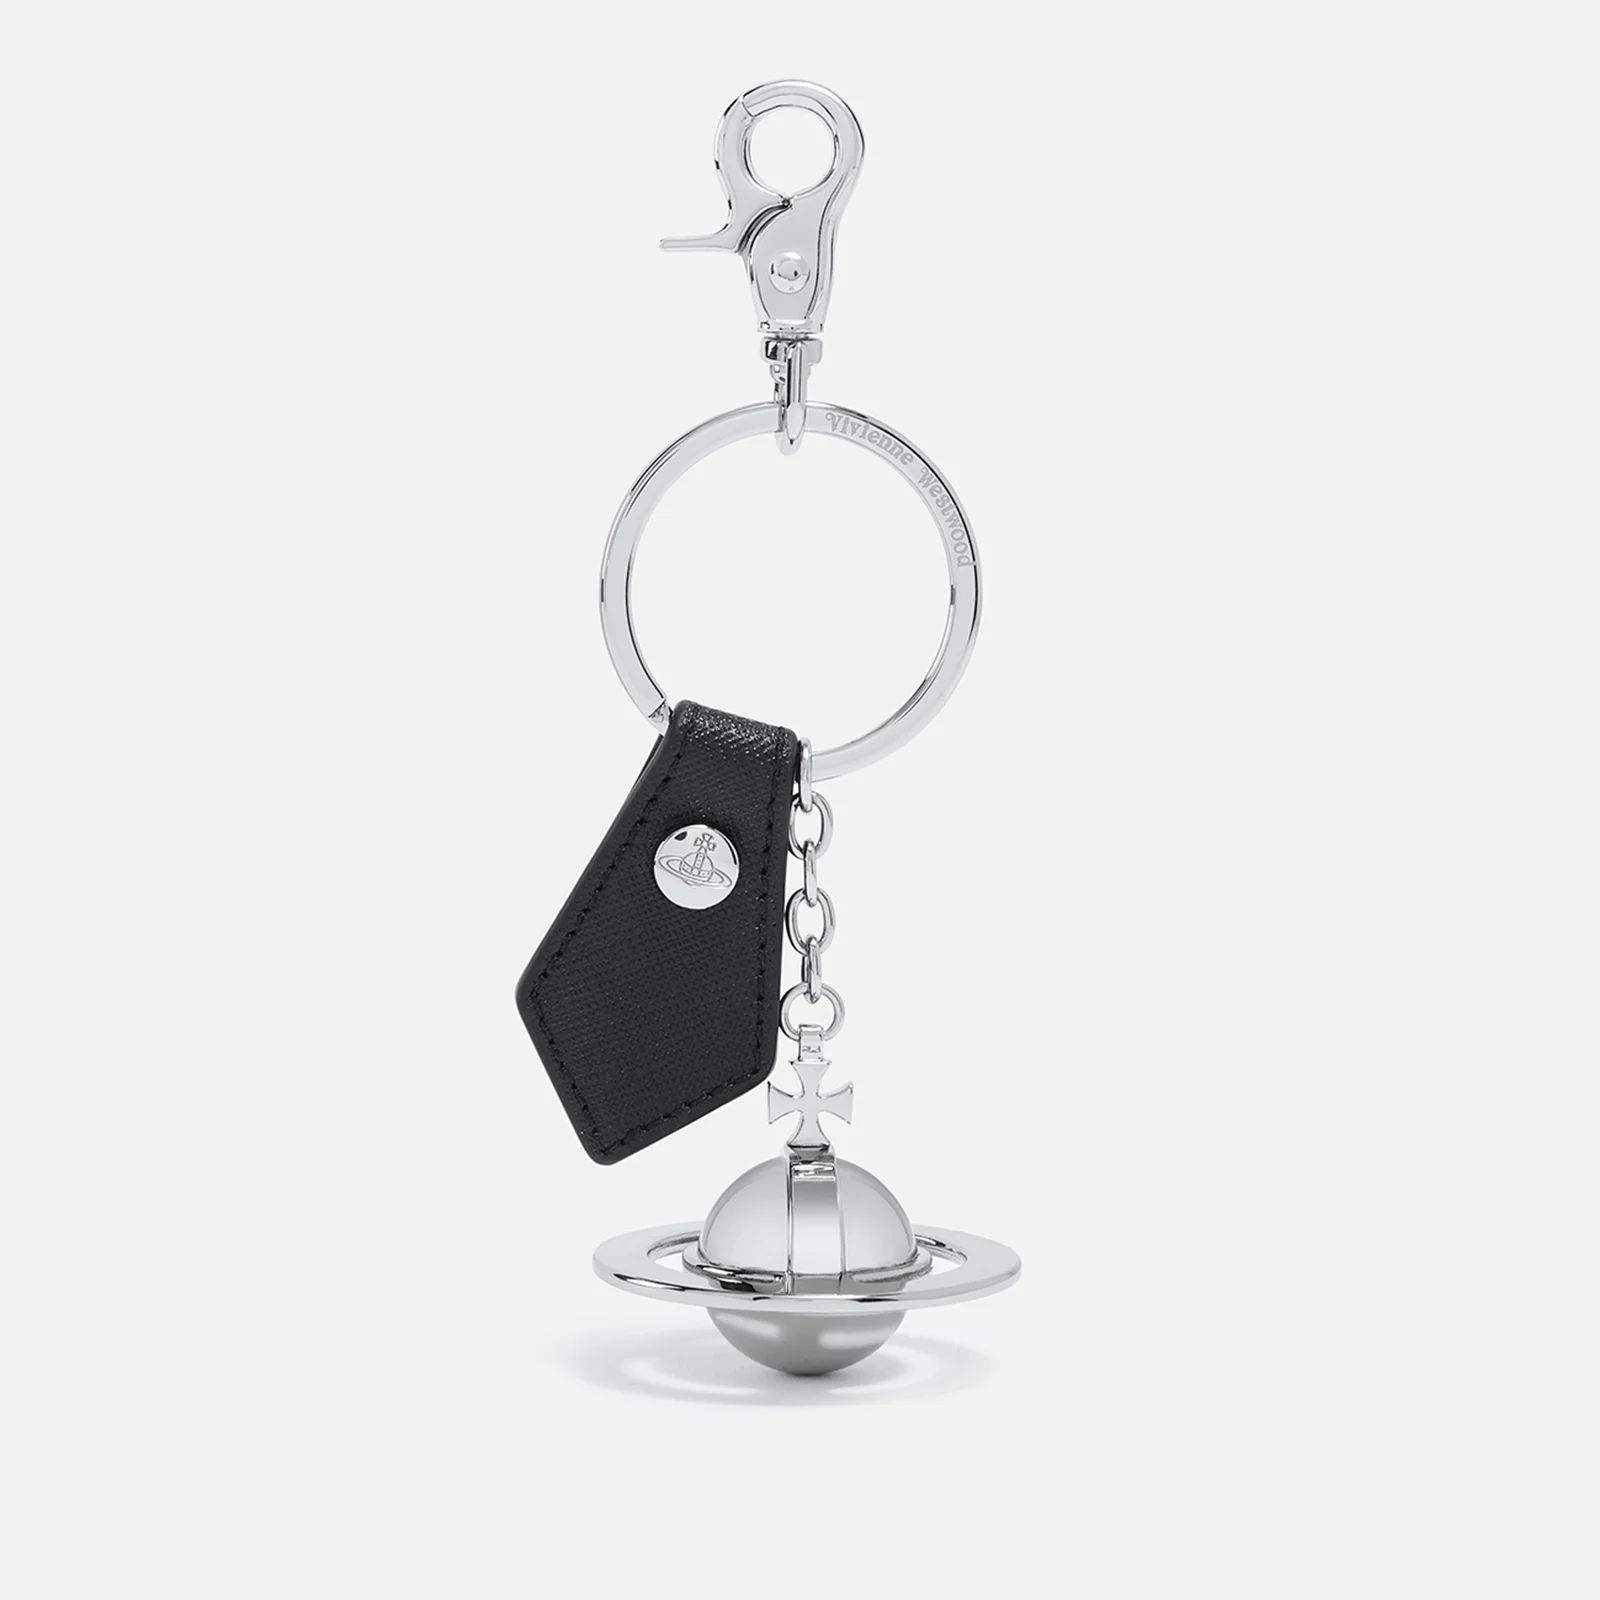 Vivienne Westwood Saffiano Orb Leather and Metal Keyring Image 1